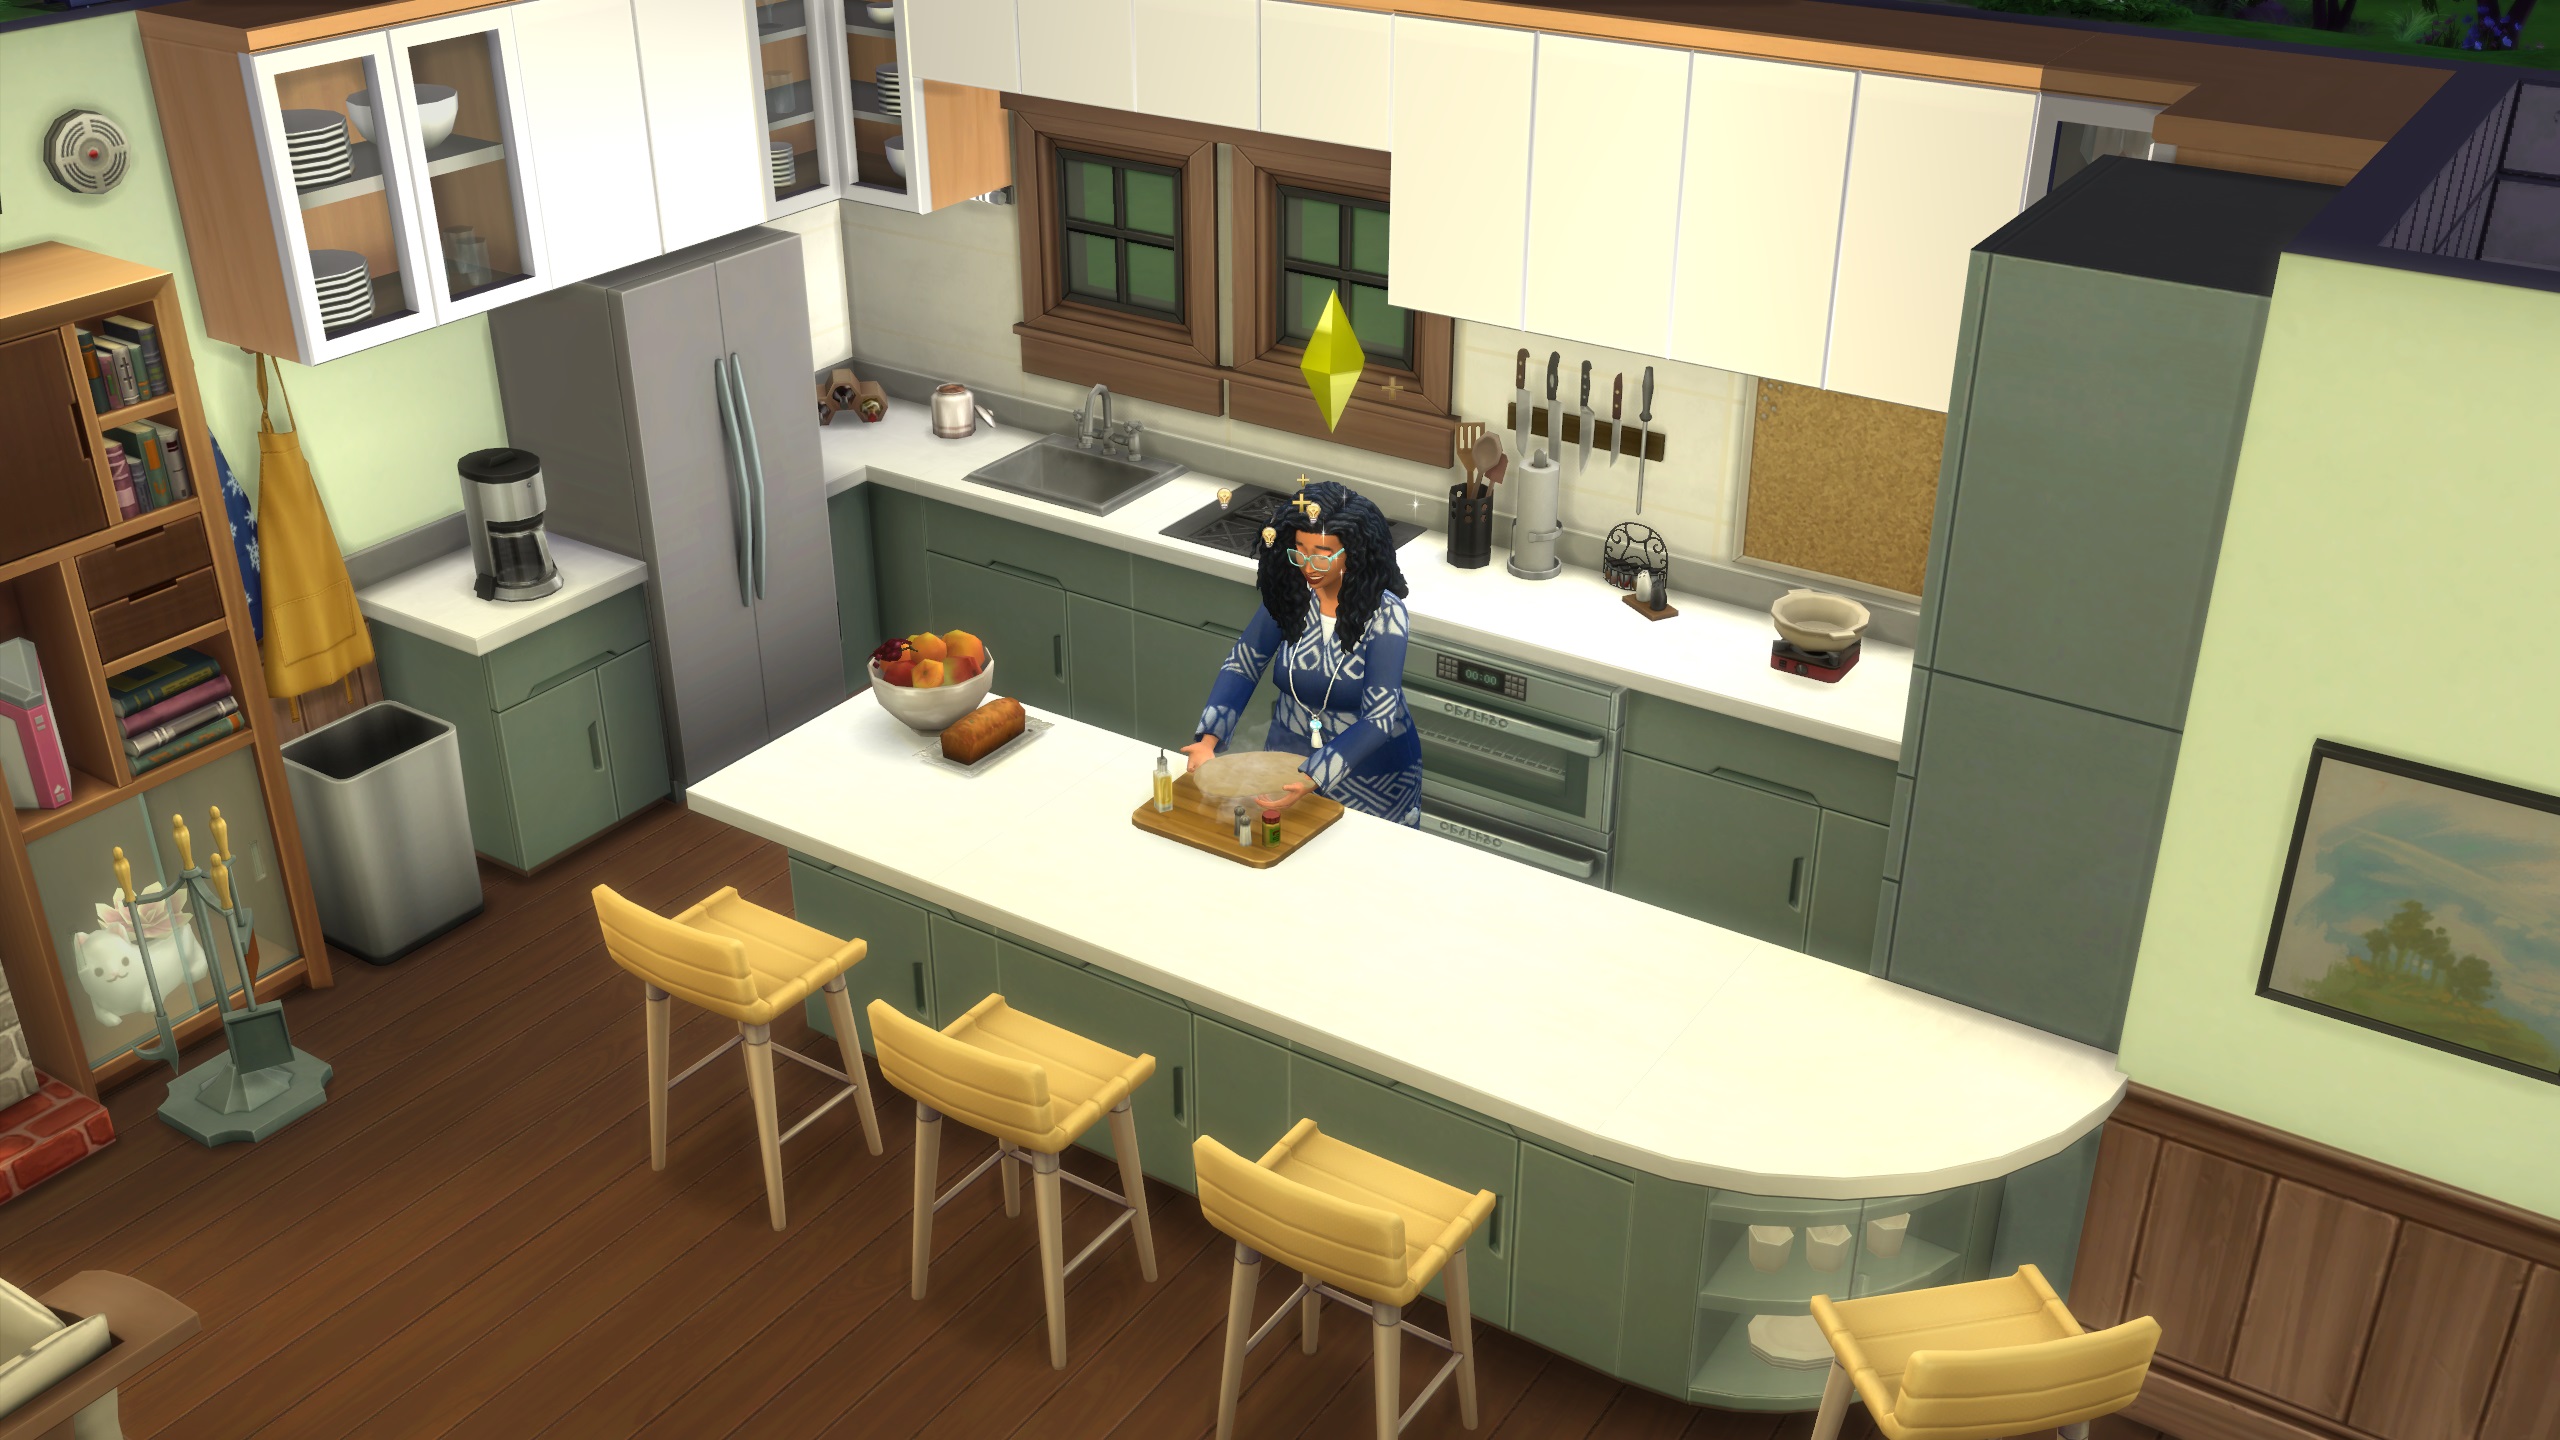 The Sims 4 build tips - A sim makes bread in a kitchen with a variety of counter and cabinet sizes.